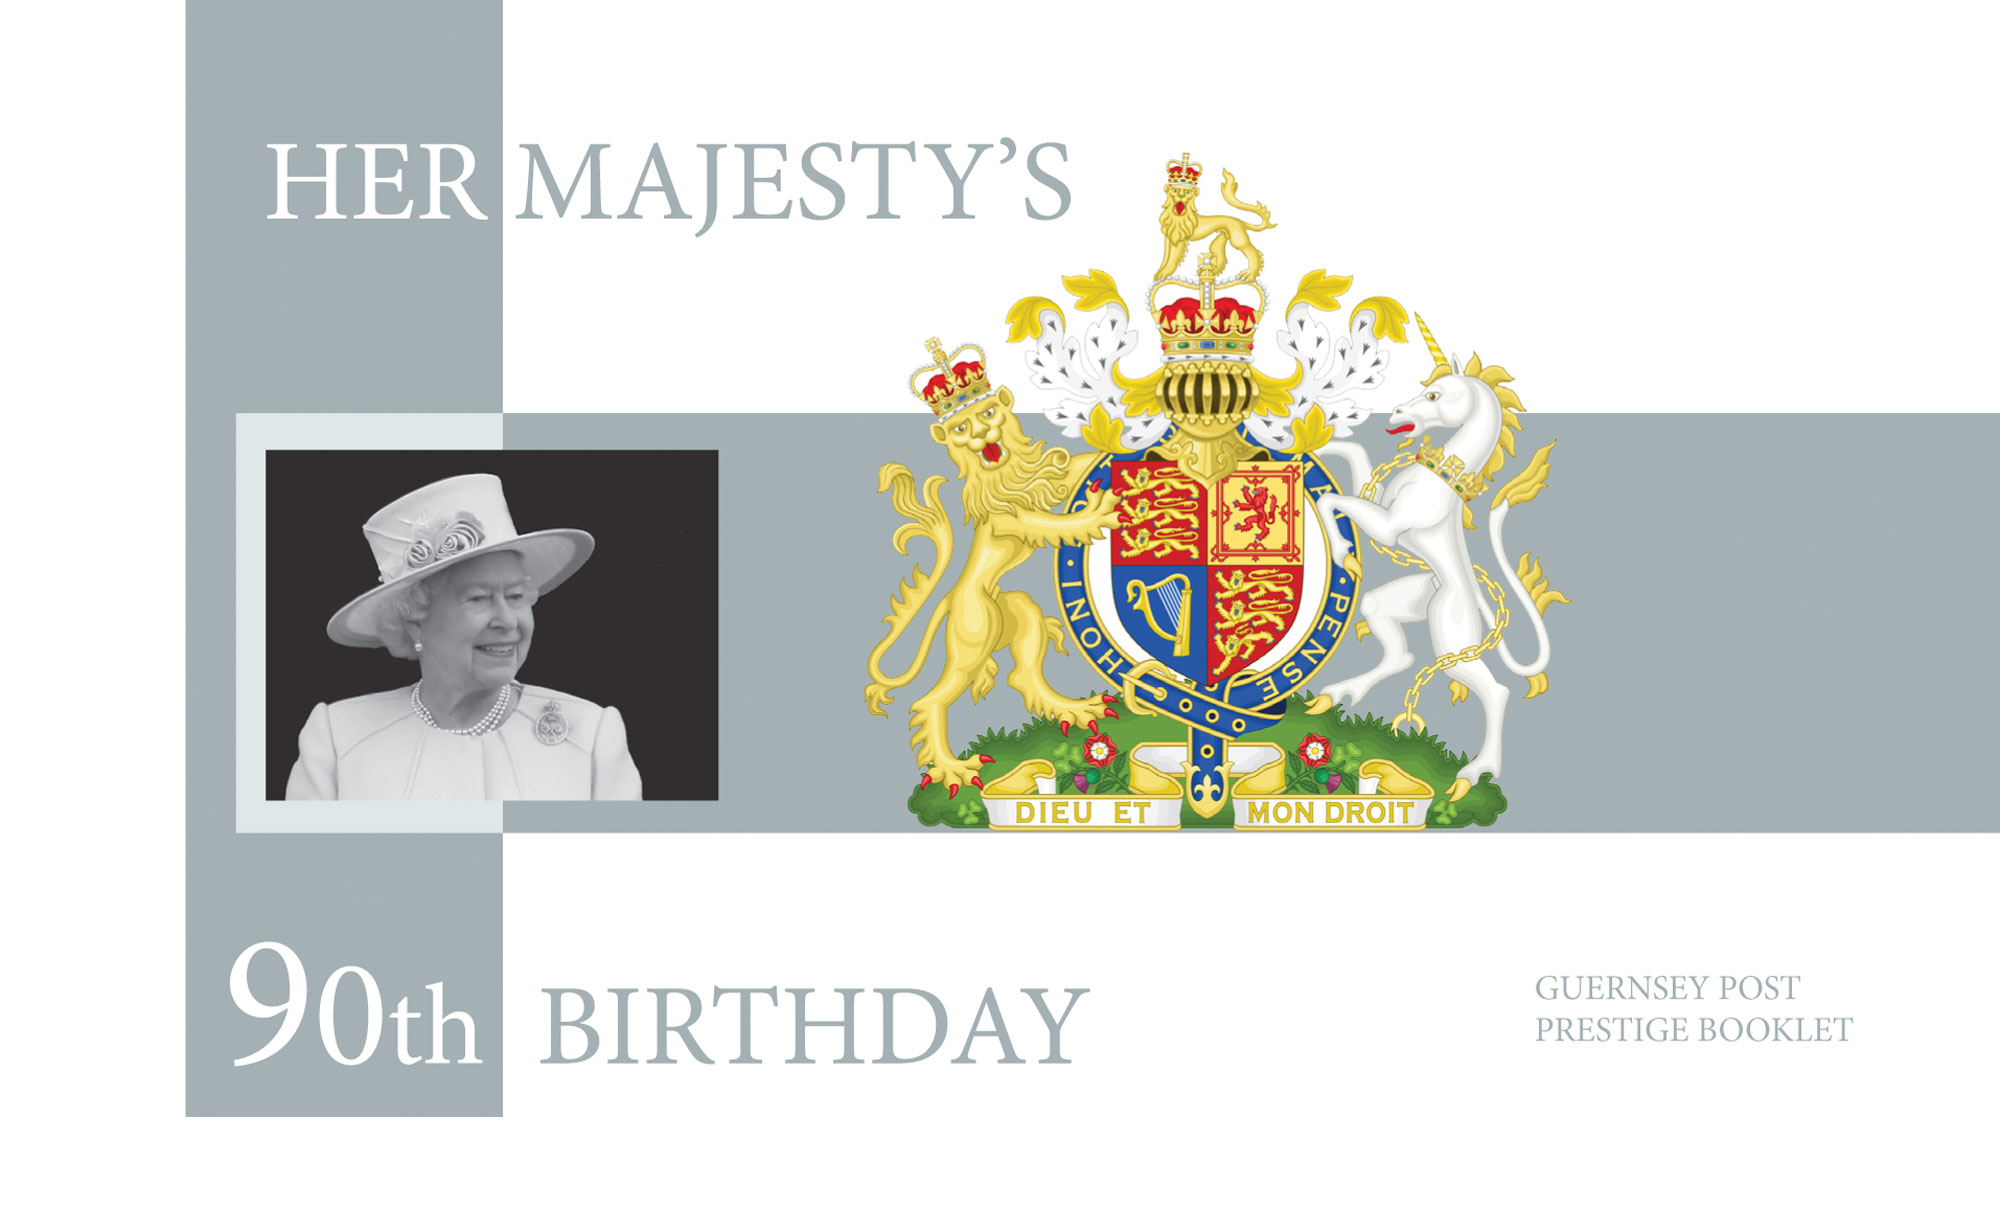 Her Majesty The Queen's 90th Birthday Prestige Booklet